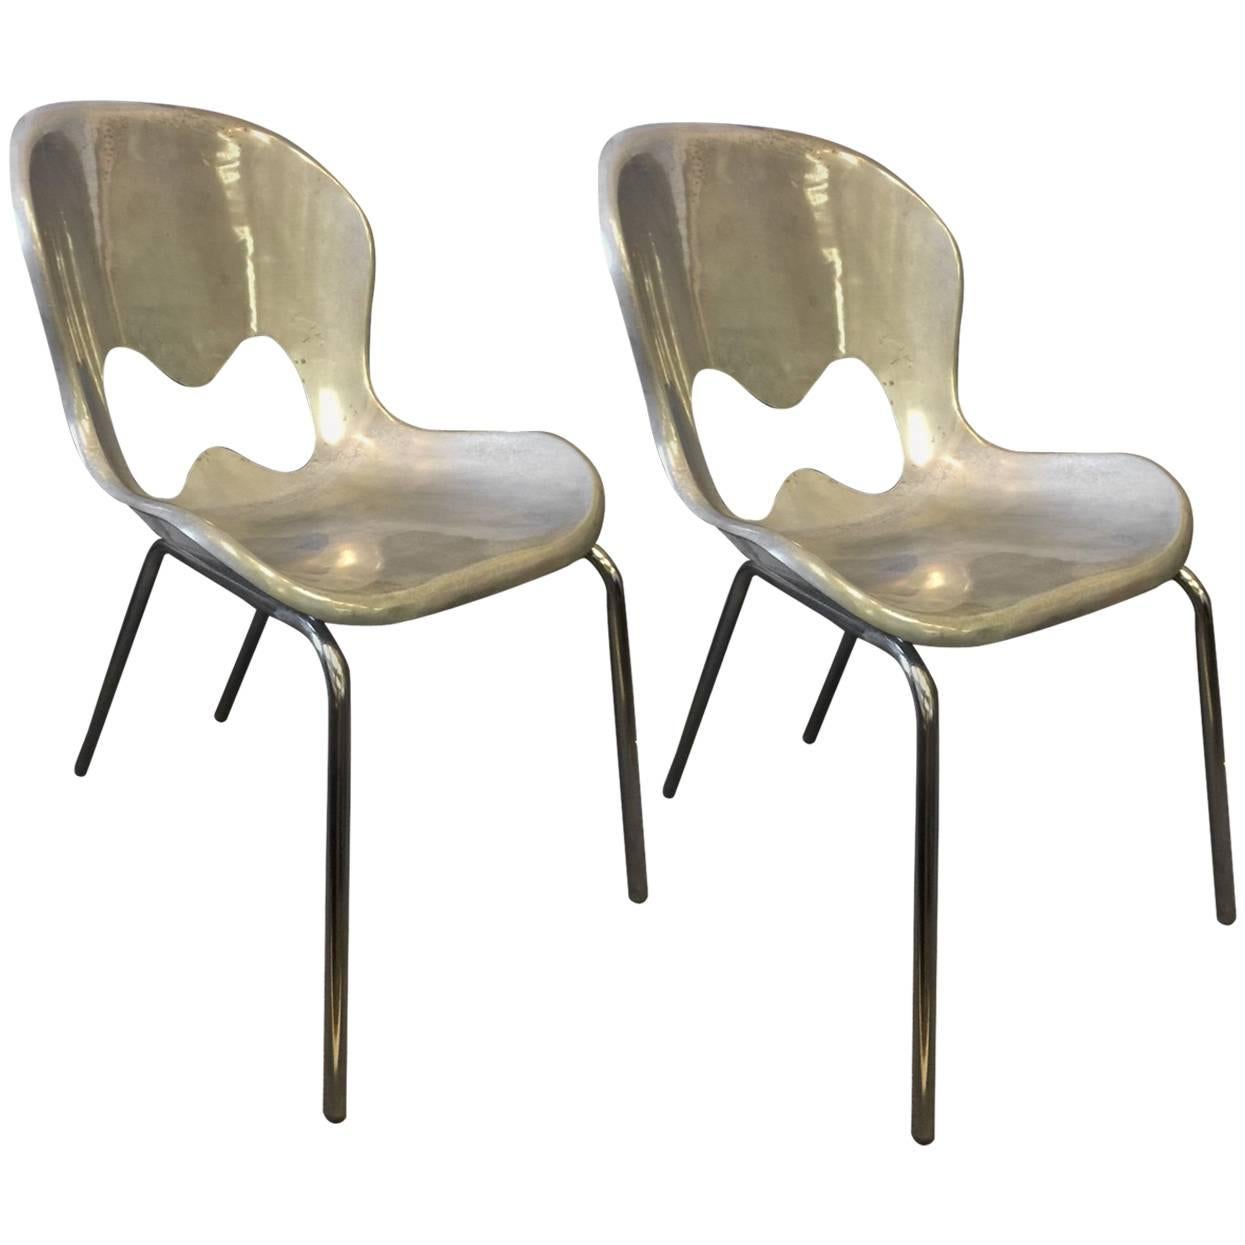 Pair of Stainless Steel Chairs by Karim Rashid for Umbra